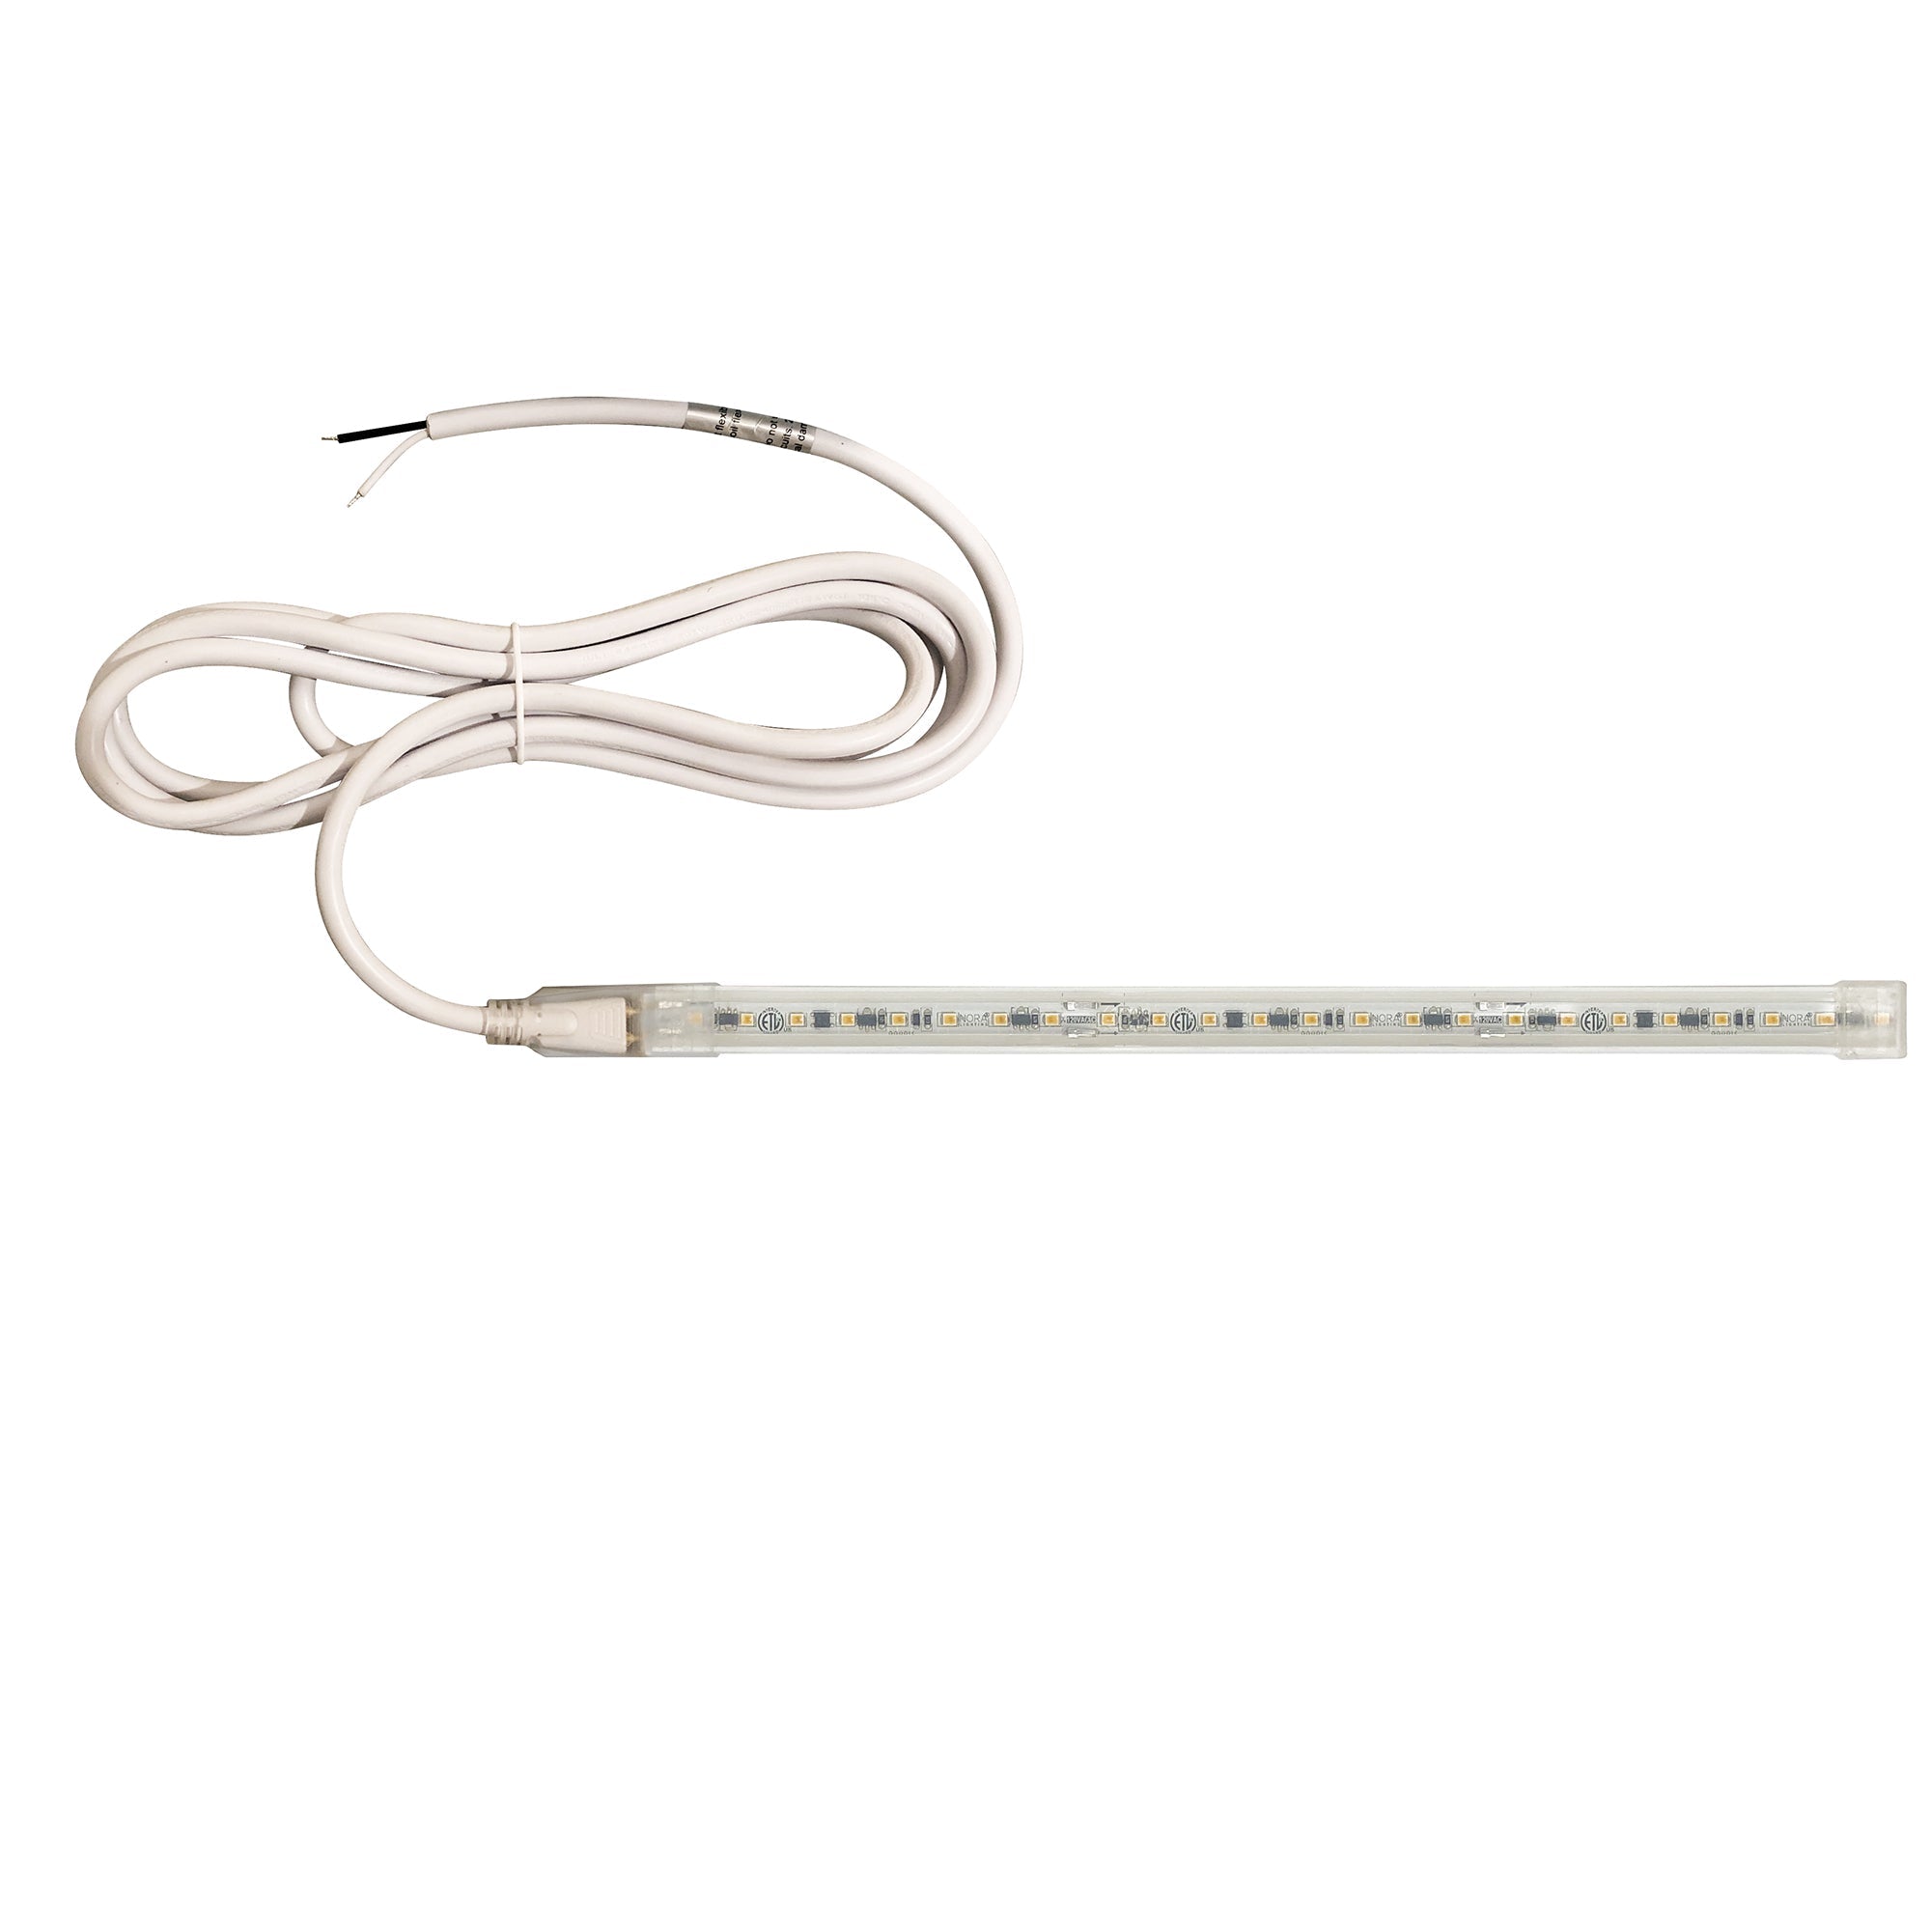 Nora Lighting NUTP13-W54-12-930/HW - Accent / Undercabinet - Custom Cut 54-ft 120V Continuous LED Tape Light, 330lm / 3.6W per foot, 3000K, w/ Mounting Clips and 8' Hardwired Power Cord